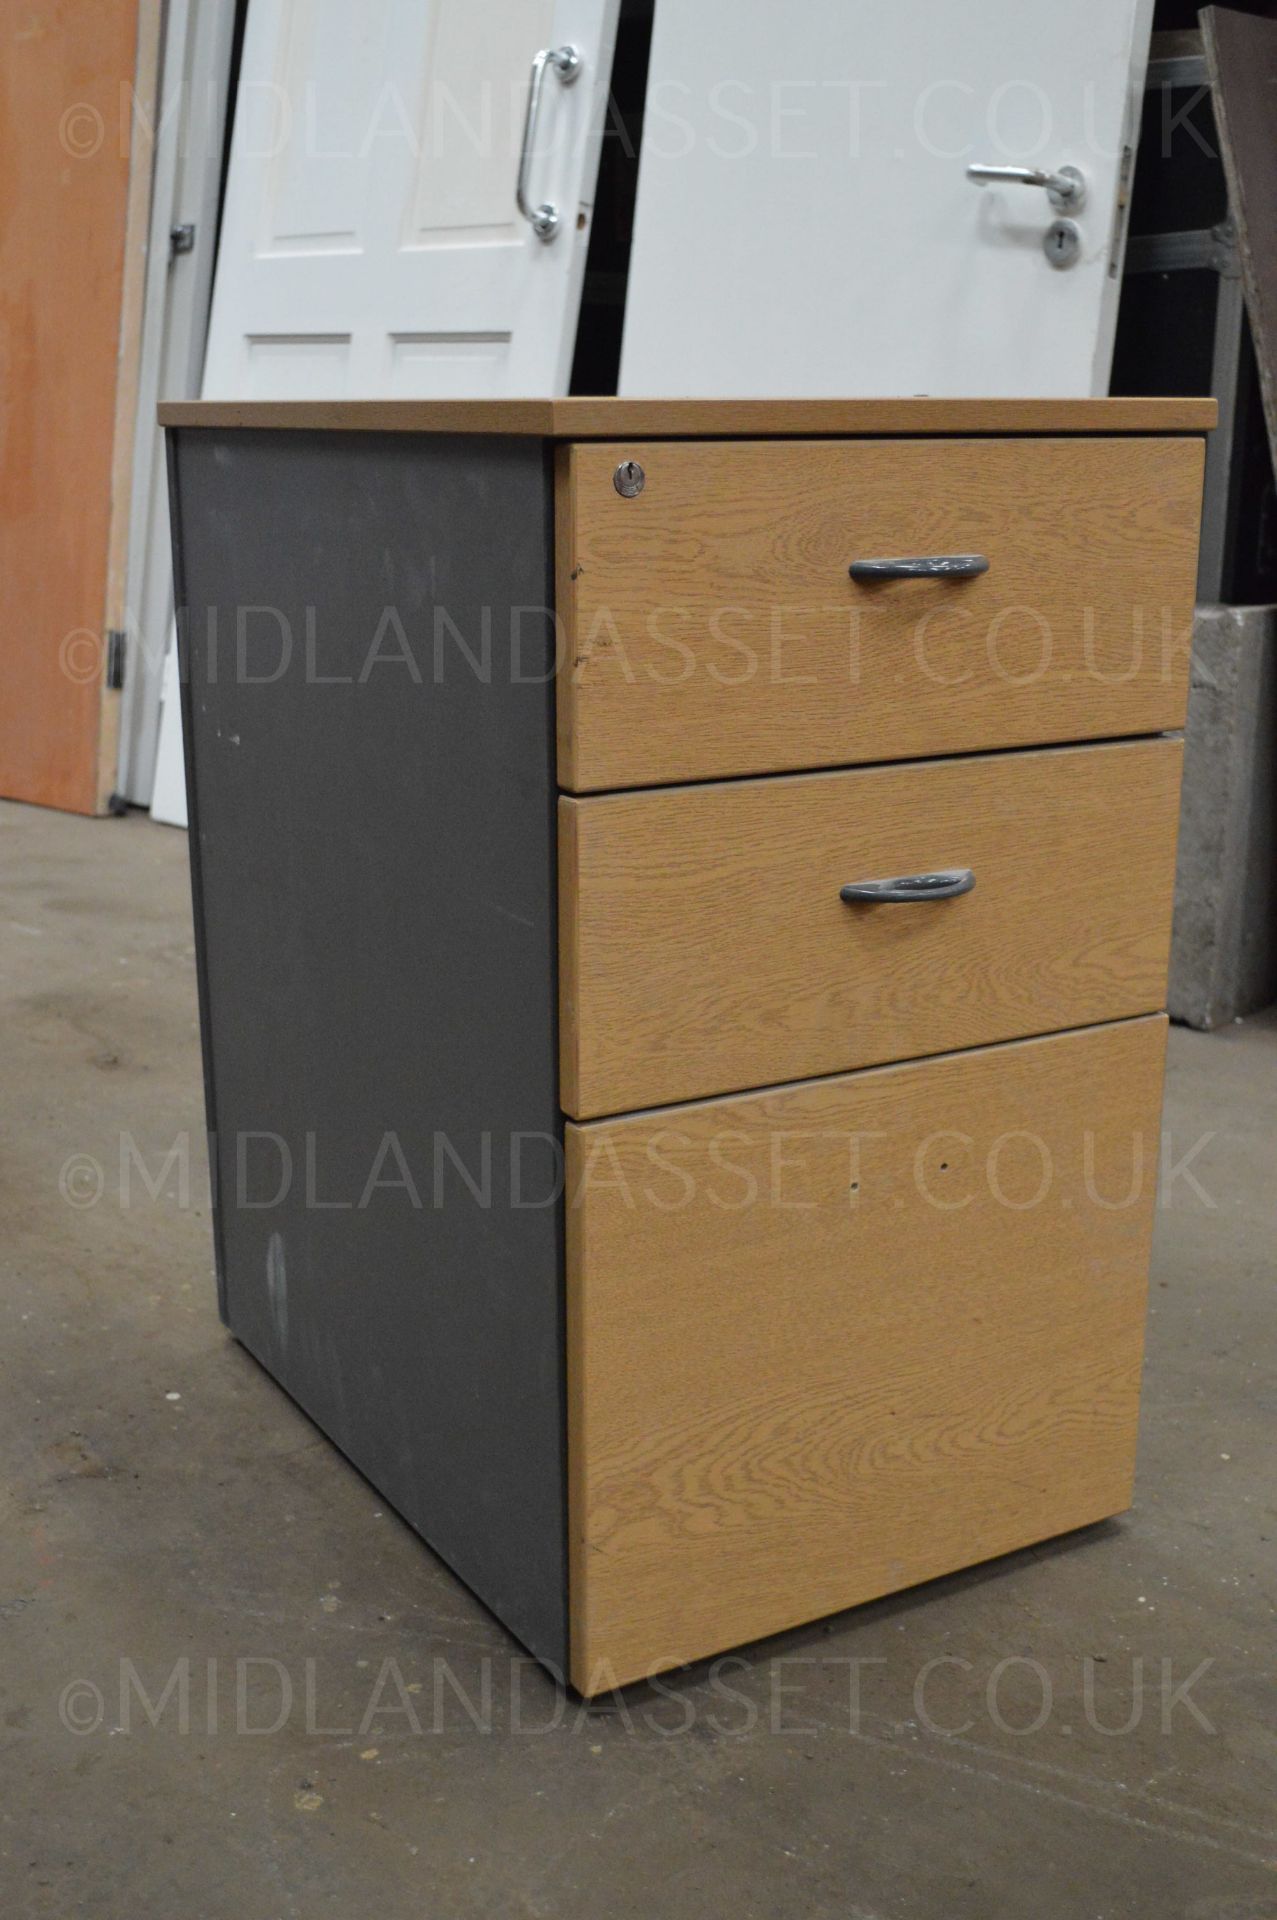 OAK OFFICE DRAWERS WITH WHEELS - USED CONDITION - Image 2 of 4